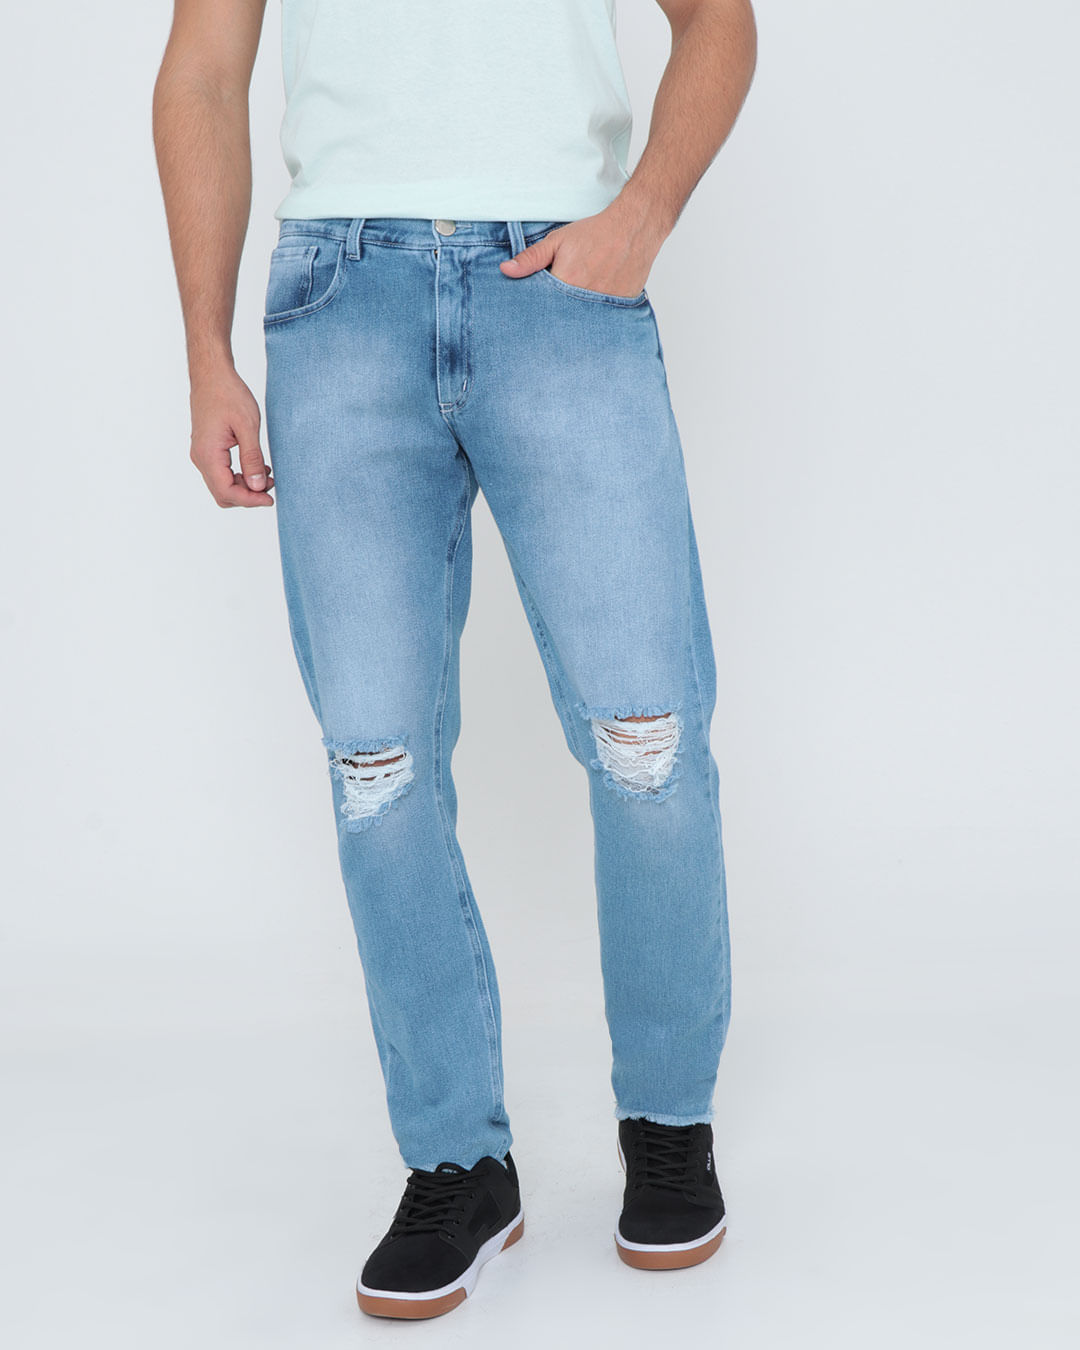 Calca-Jns-2102646-Cropped-Azm-Mol---Blue-Jeans-Claro